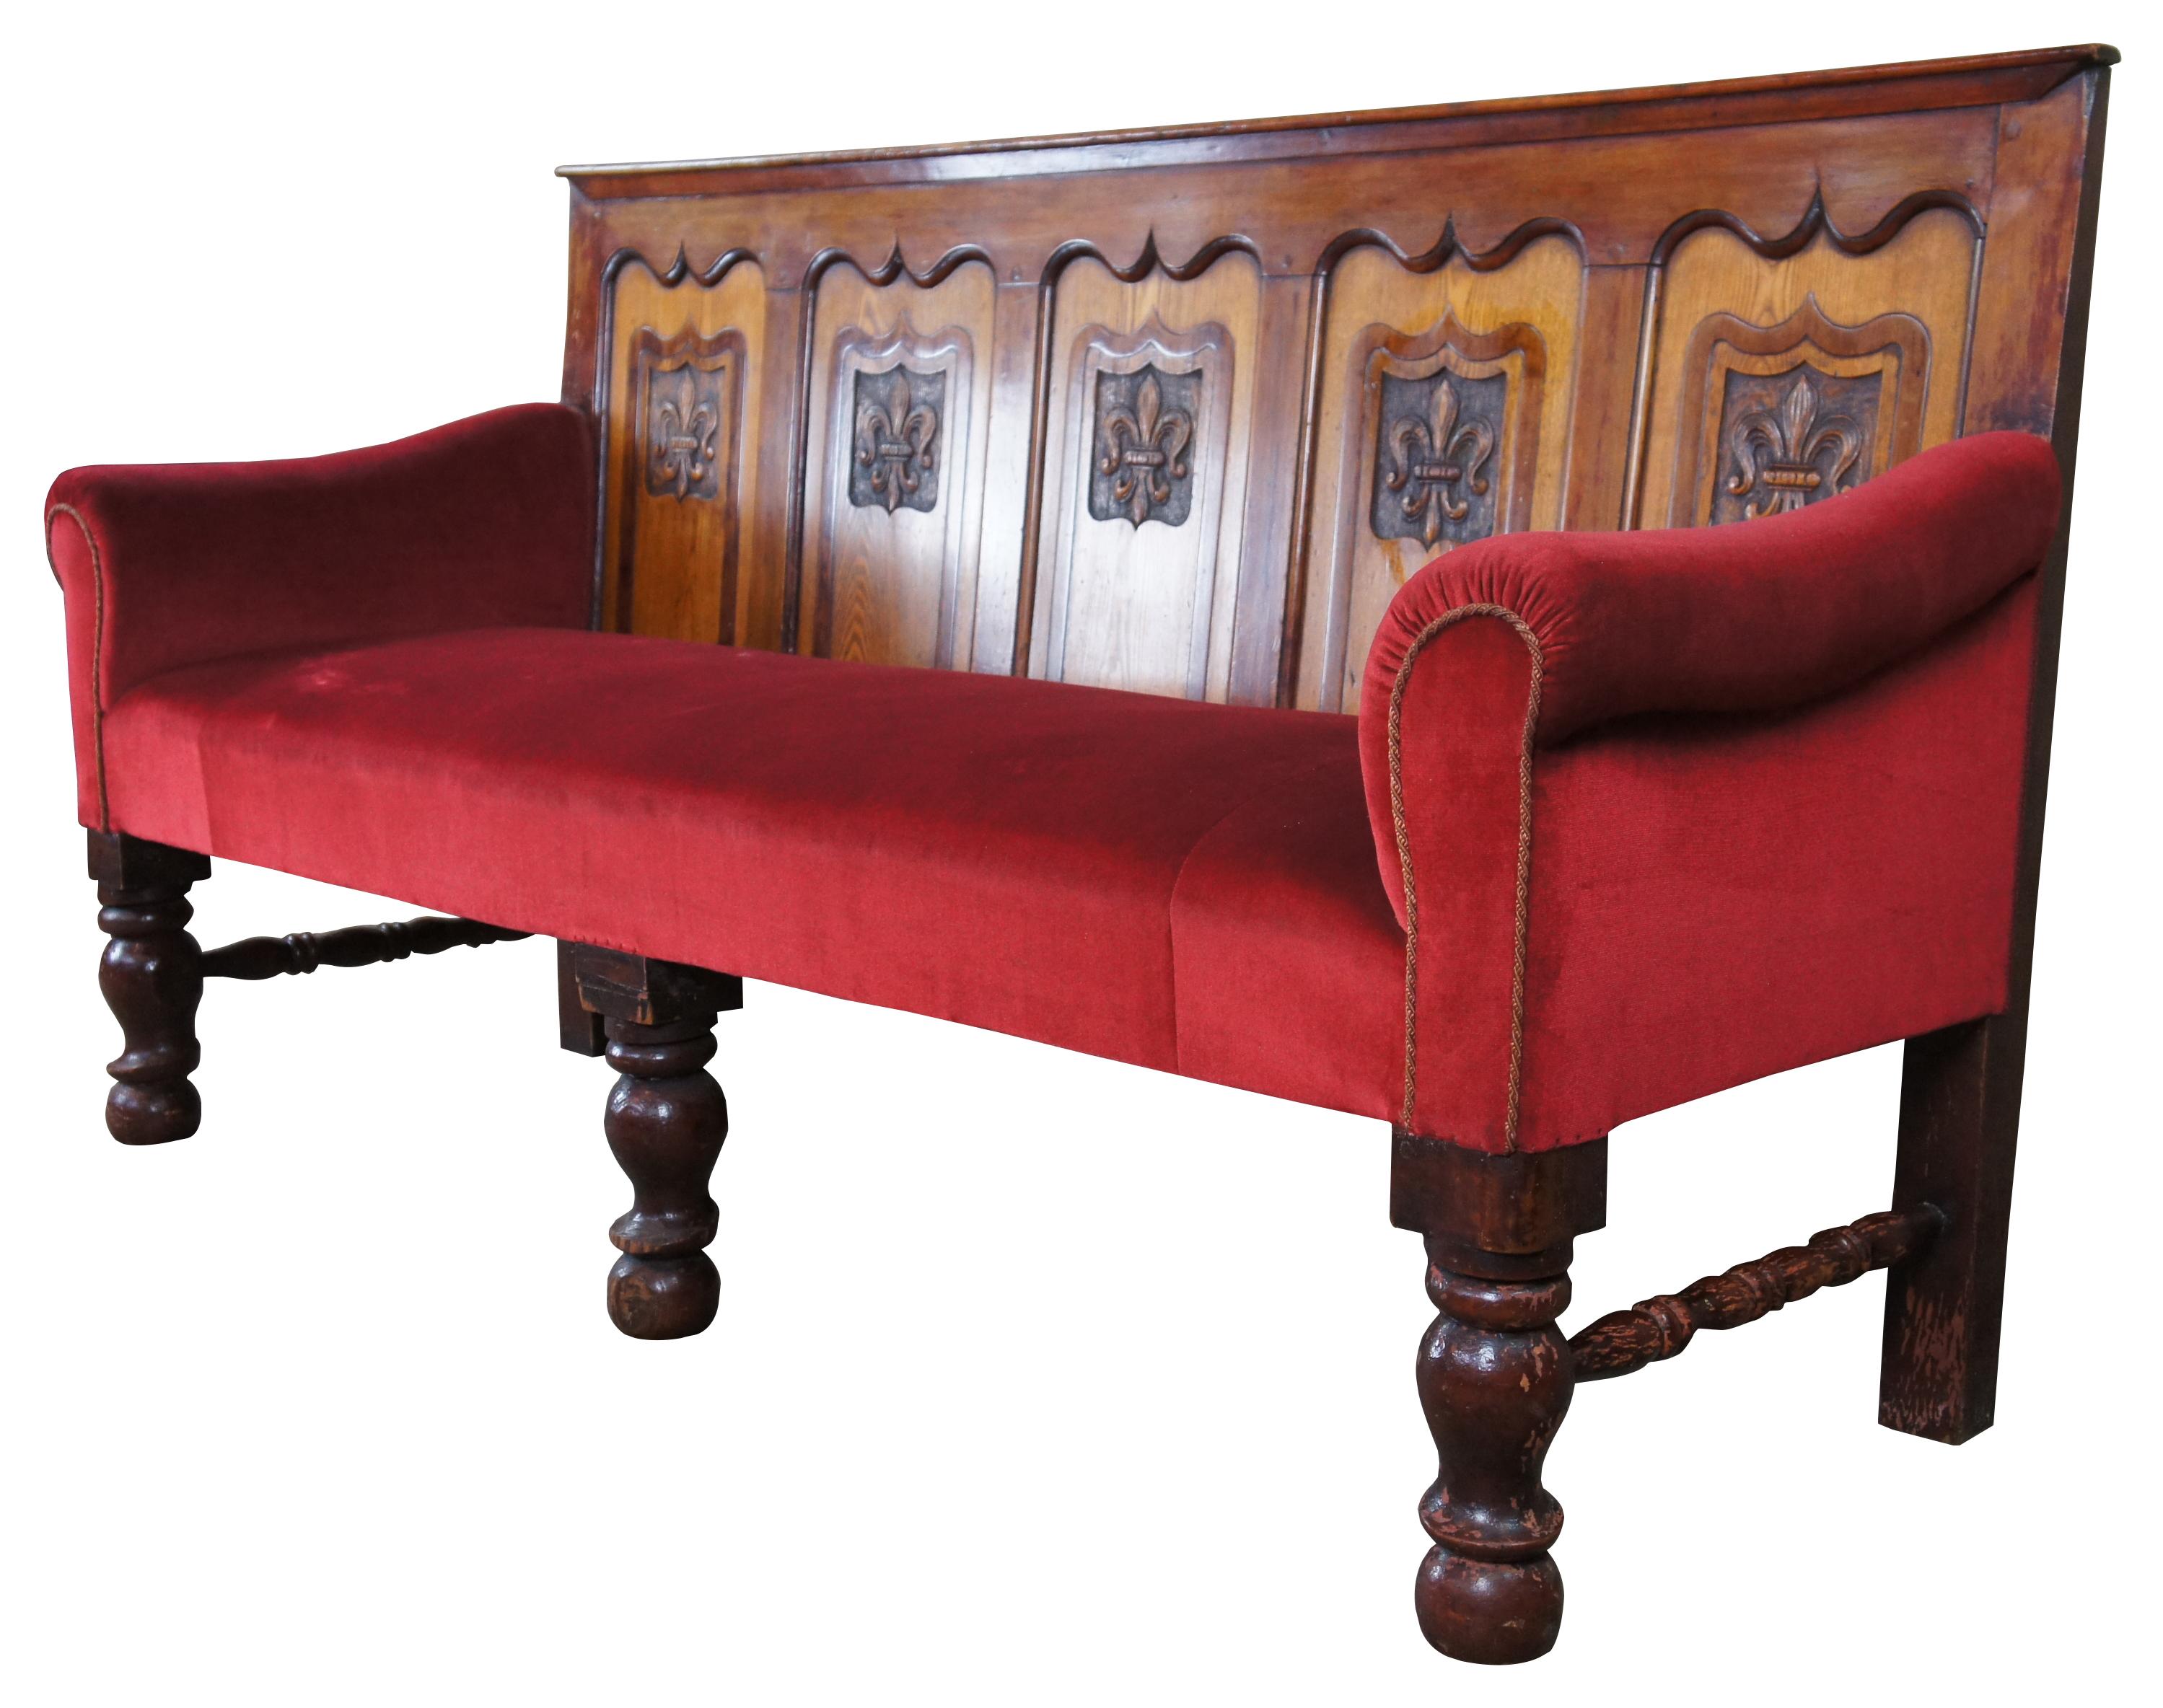 Extraordinary 18th century English oak pub bench or sofa.  A rectangular form with high back and red velvet upholstery.  Features Gothic revival panels and Fleur De Lis carvings.  The bench is supported by robust turned bun feet.  Origin London,